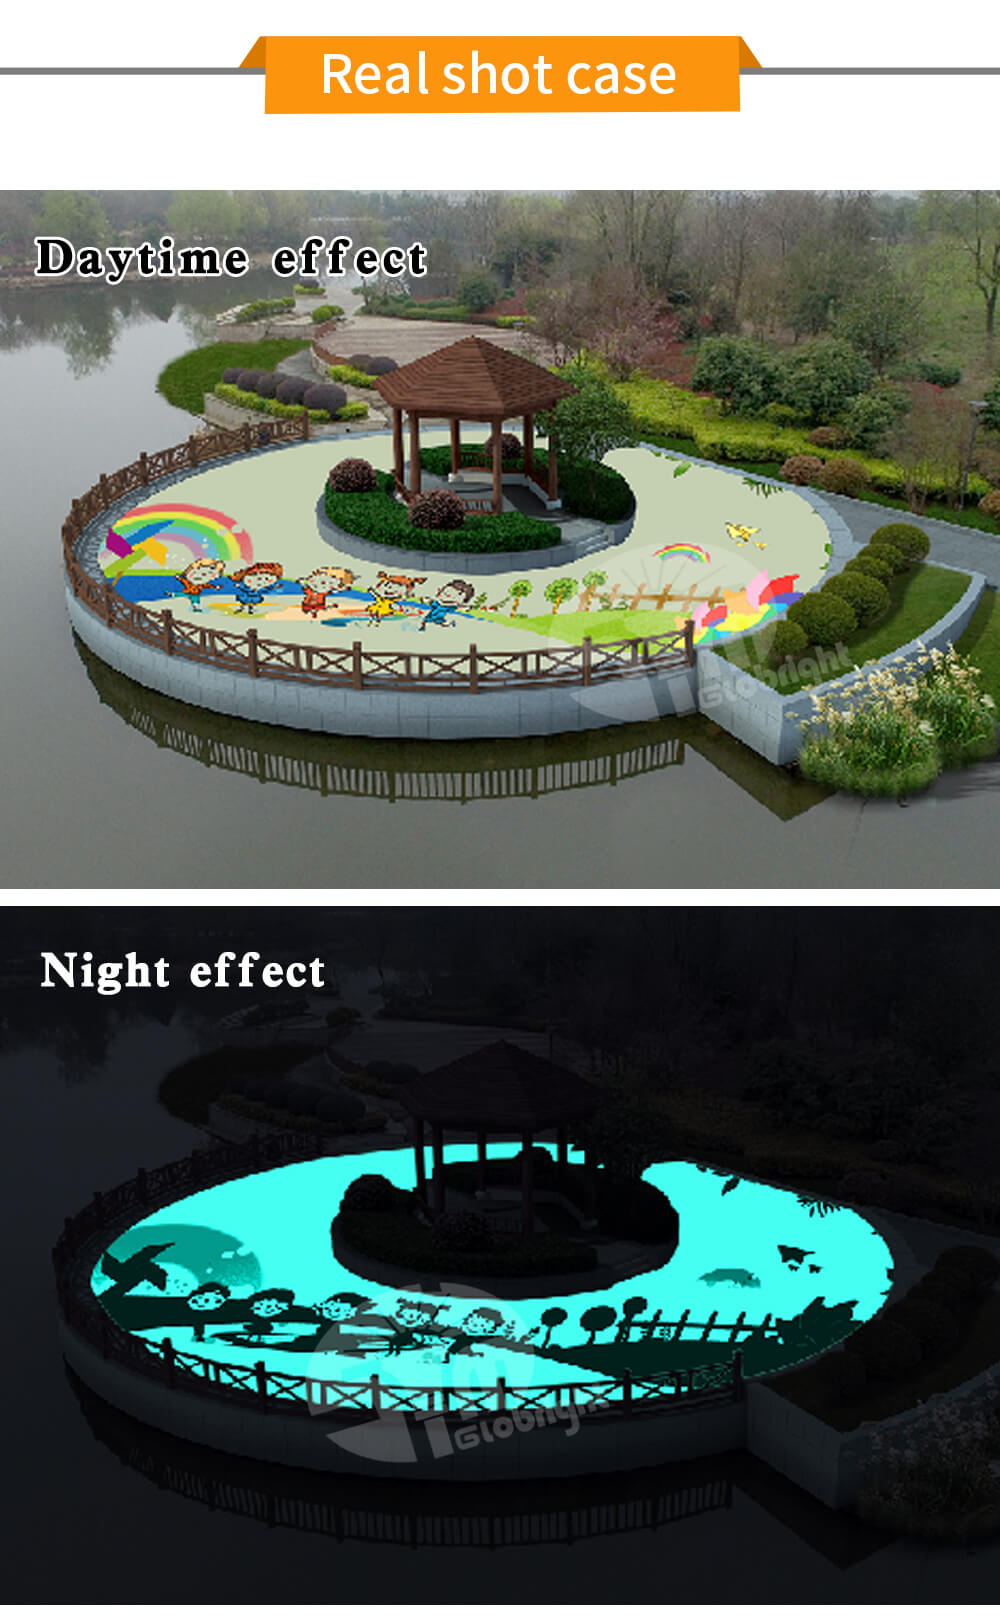 Inorganic Self-luminous Tile for Square And Secnic, Glow in The Dark without Power, Landscaping Product